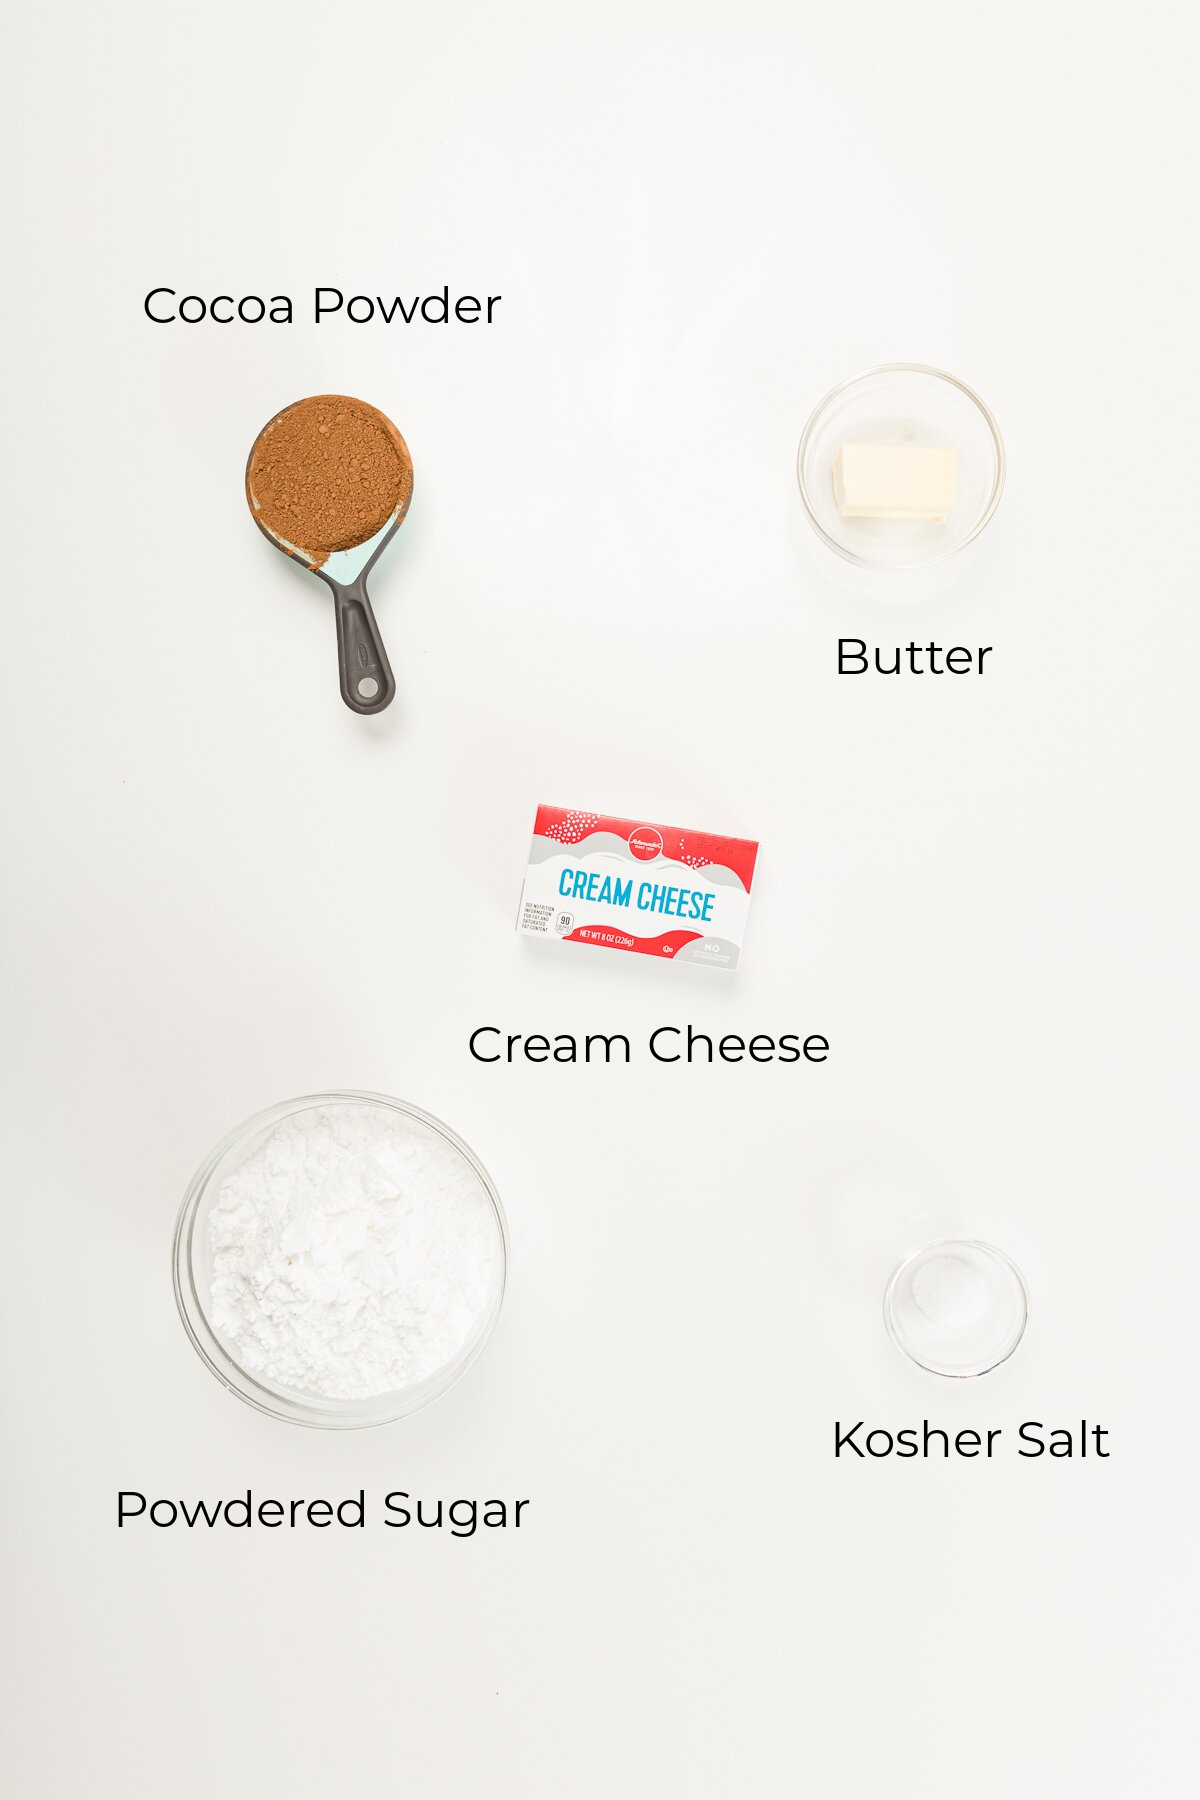 Overhead view of ingredients in chocoalte cream cheese frosting - cocoa powder, butter, cream cheese, powdered sugar, and kosher salt